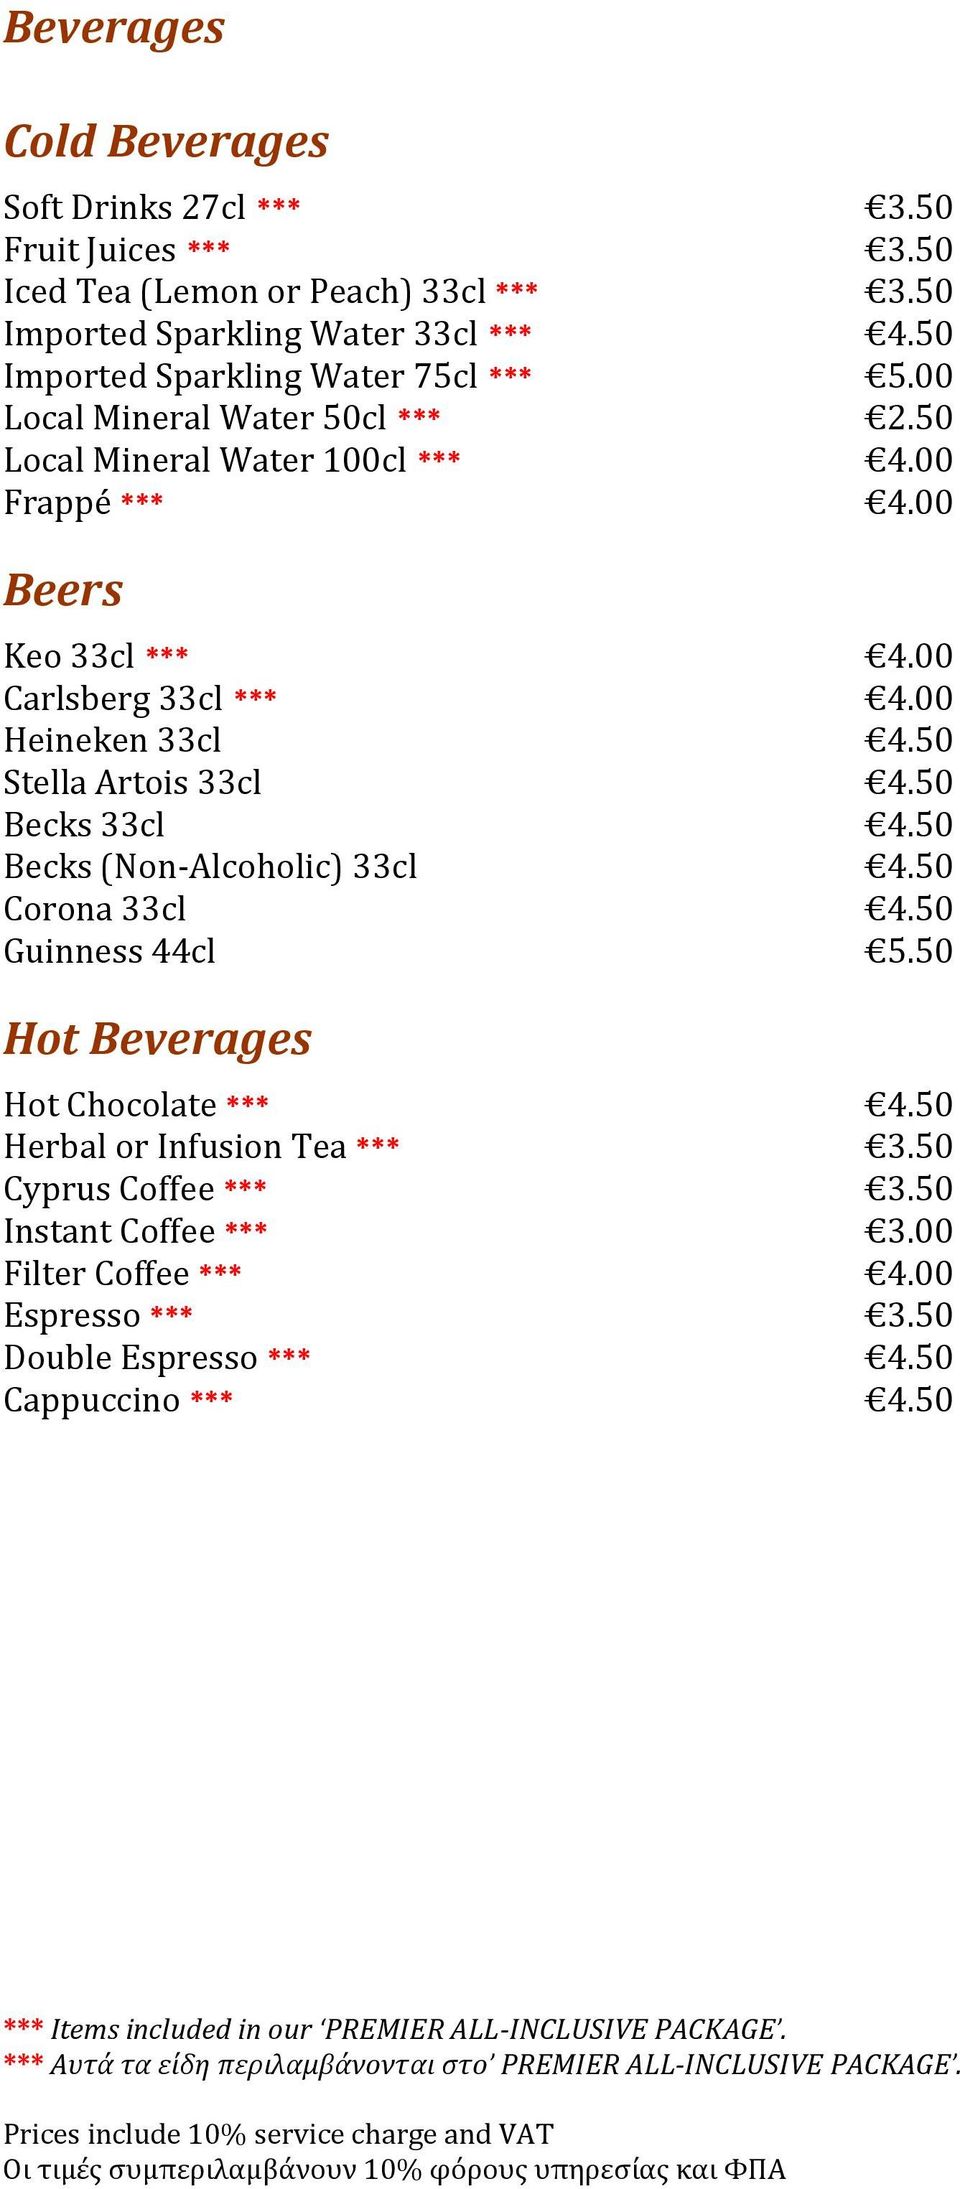 50 Becks (Non-Alcoholic) 33cl 4.50 Corona 33cl 4.50 Guinness 44cl 5.50 Hot Beverages Hot Chocolate *** 4.50 Herbal or Infusion Tea *** 3.50 Cyprus Coffee *** 3.50 Instant Coffee *** 3.